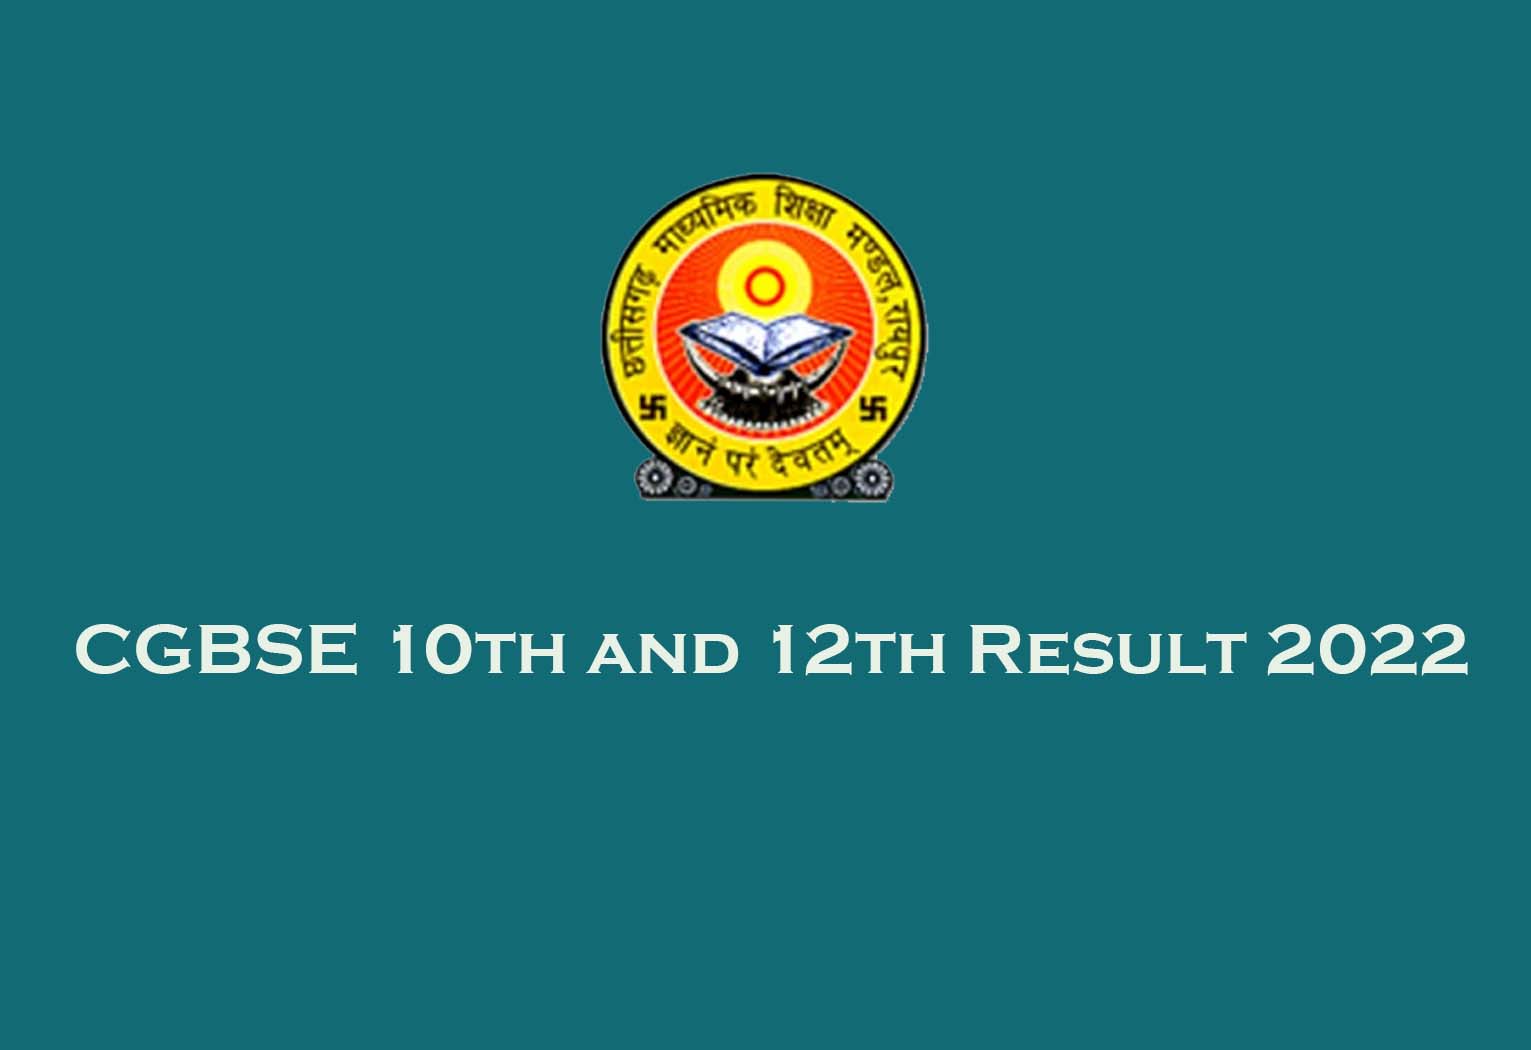 CGBSE 10th and 12th Result 2022